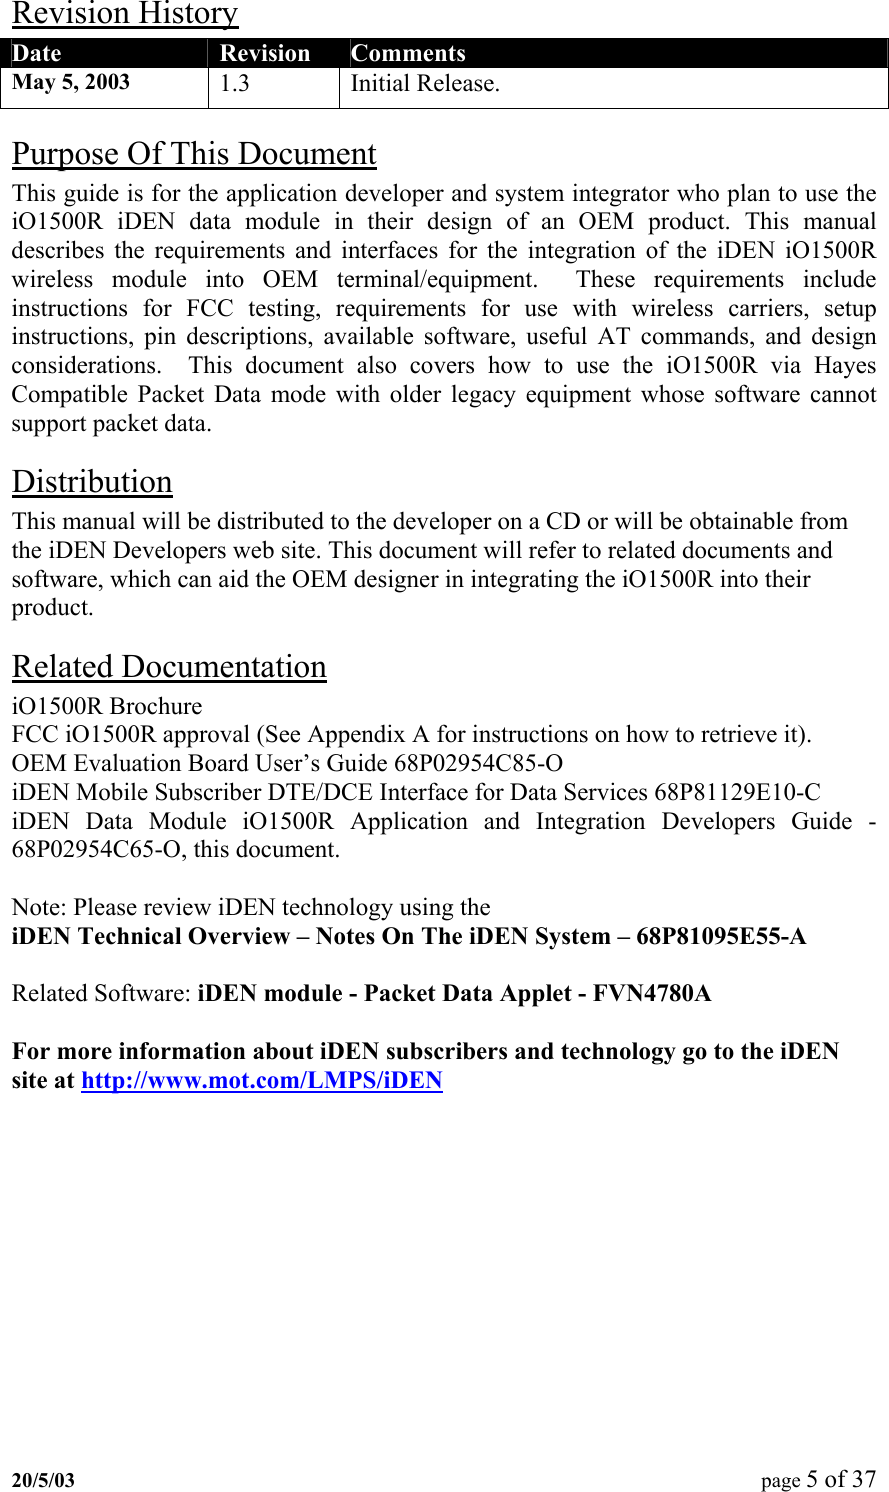 Revision History Date  Revision  Comments May 5, 2003  1.3 Initial Release. Purpose Of This Document This guide is for the application developer and system integrator who plan to use the iO1500R iDEN data module in their design of an OEM product. This manual describes the requirements and interfaces for the integration of the iDEN iO1500R wireless module into OEM terminal/equipment.  These requirements include instructions for FCC testing, requirements for use with wireless carriers, setup instructions, pin descriptions, available software, useful AT commands, and design considerations.  This document also covers how to use the iO1500R via Hayes Compatible Packet Data mode with older legacy equipment whose software cannot support packet data. Distribution This manual will be distributed to the developer on a CD or will be obtainable from the iDEN Developers web site. This document will refer to related documents and software, which can aid the OEM designer in integrating the iO1500R into their product. Related Documentation  iO1500R Brochure FCC iO1500R approval (See Appendix A for instructions on how to retrieve it). OEM Evaluation Board User’s Guide 68P02954C85-O iDEN Mobile Subscriber DTE/DCE Interface for Data Services 68P81129E10-C iDEN Data Module iO1500R Application and Integration Developers Guide - 68P02954C65-O, this document.  Note: Please review iDEN technology using the  iDEN Technical Overview – Notes On The iDEN System – 68P81095E55-A  Related Software: iDEN module - Packet Data Applet - FVN4780A  For more information about iDEN subscribers and technology go to the iDEN site at http://www.mot.com/LMPS/iDEN 20/5/03  page 5 of 37   